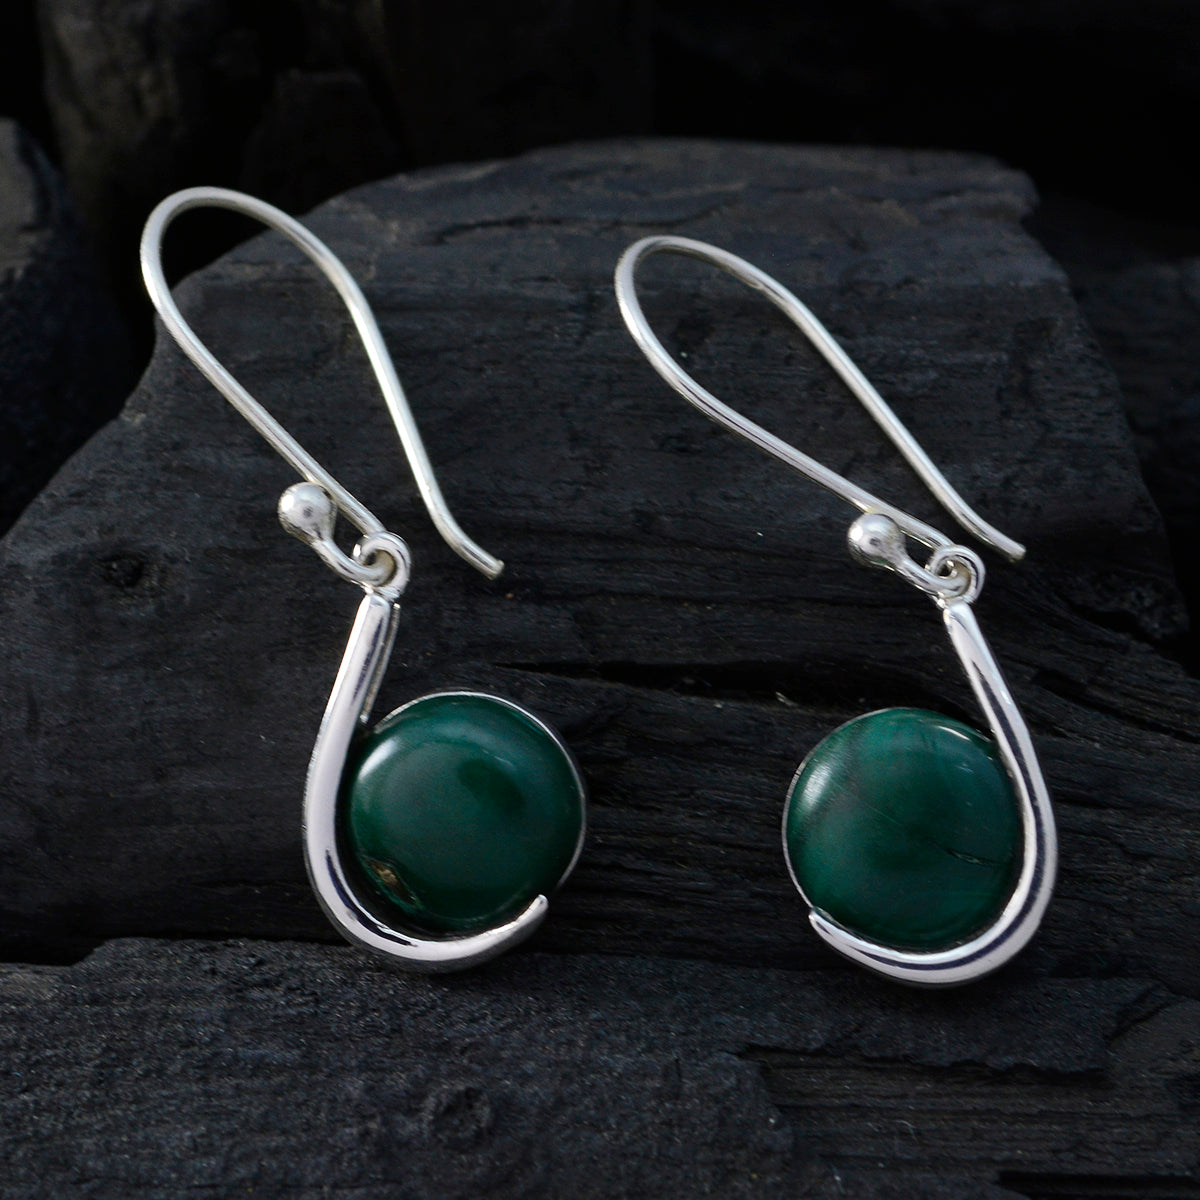 Riyo Good Gemstones round Cabochon Green Malachatie Silver Earrings gift for new years day